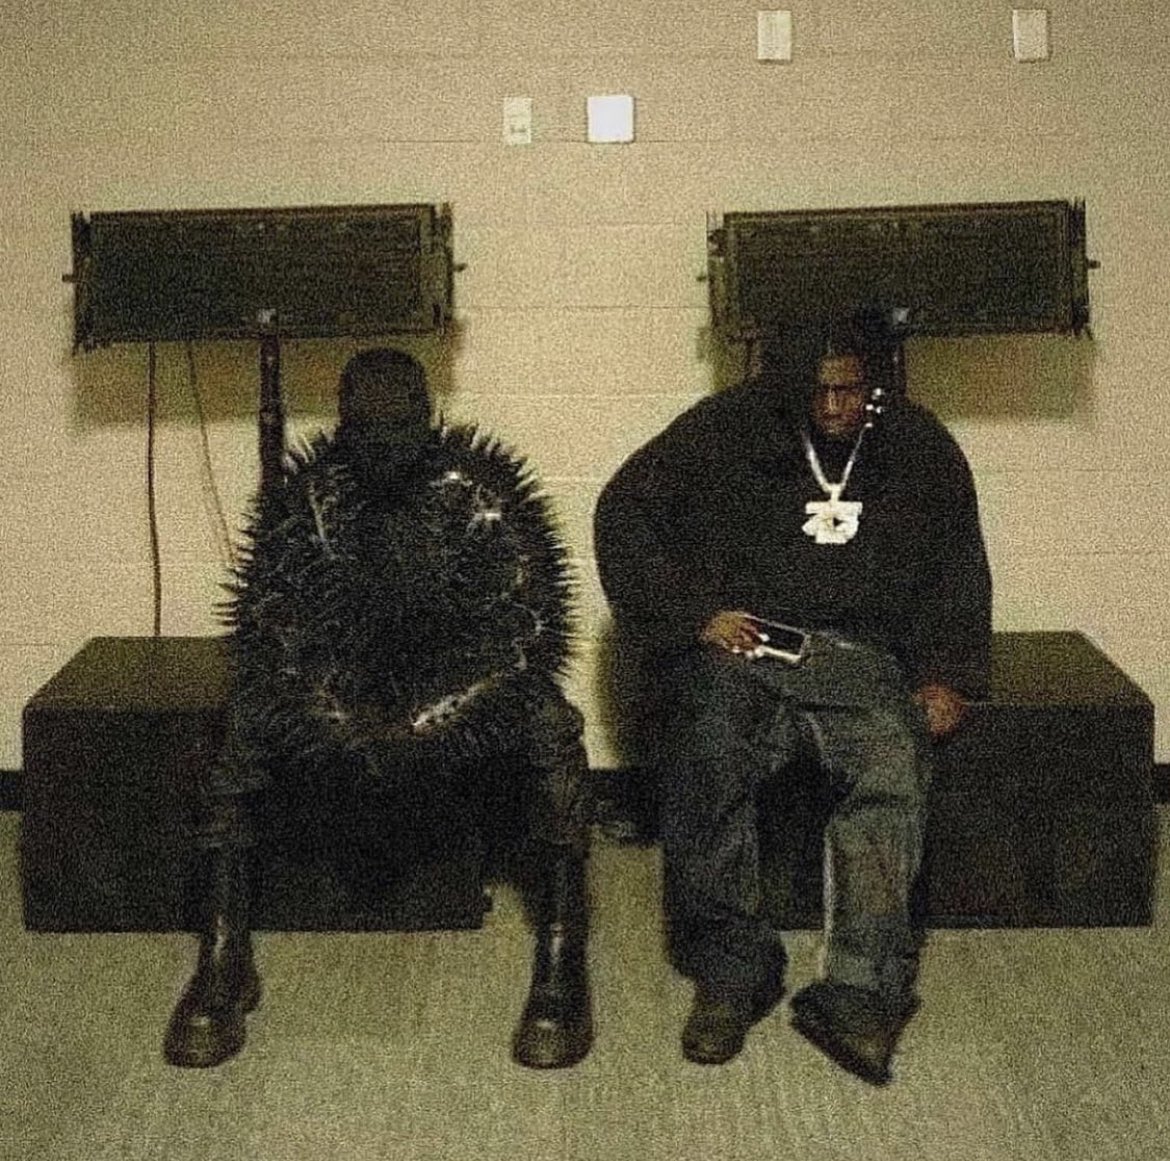 20. Kanye West & Lil Yachty backstage at the DONDA listening party. 